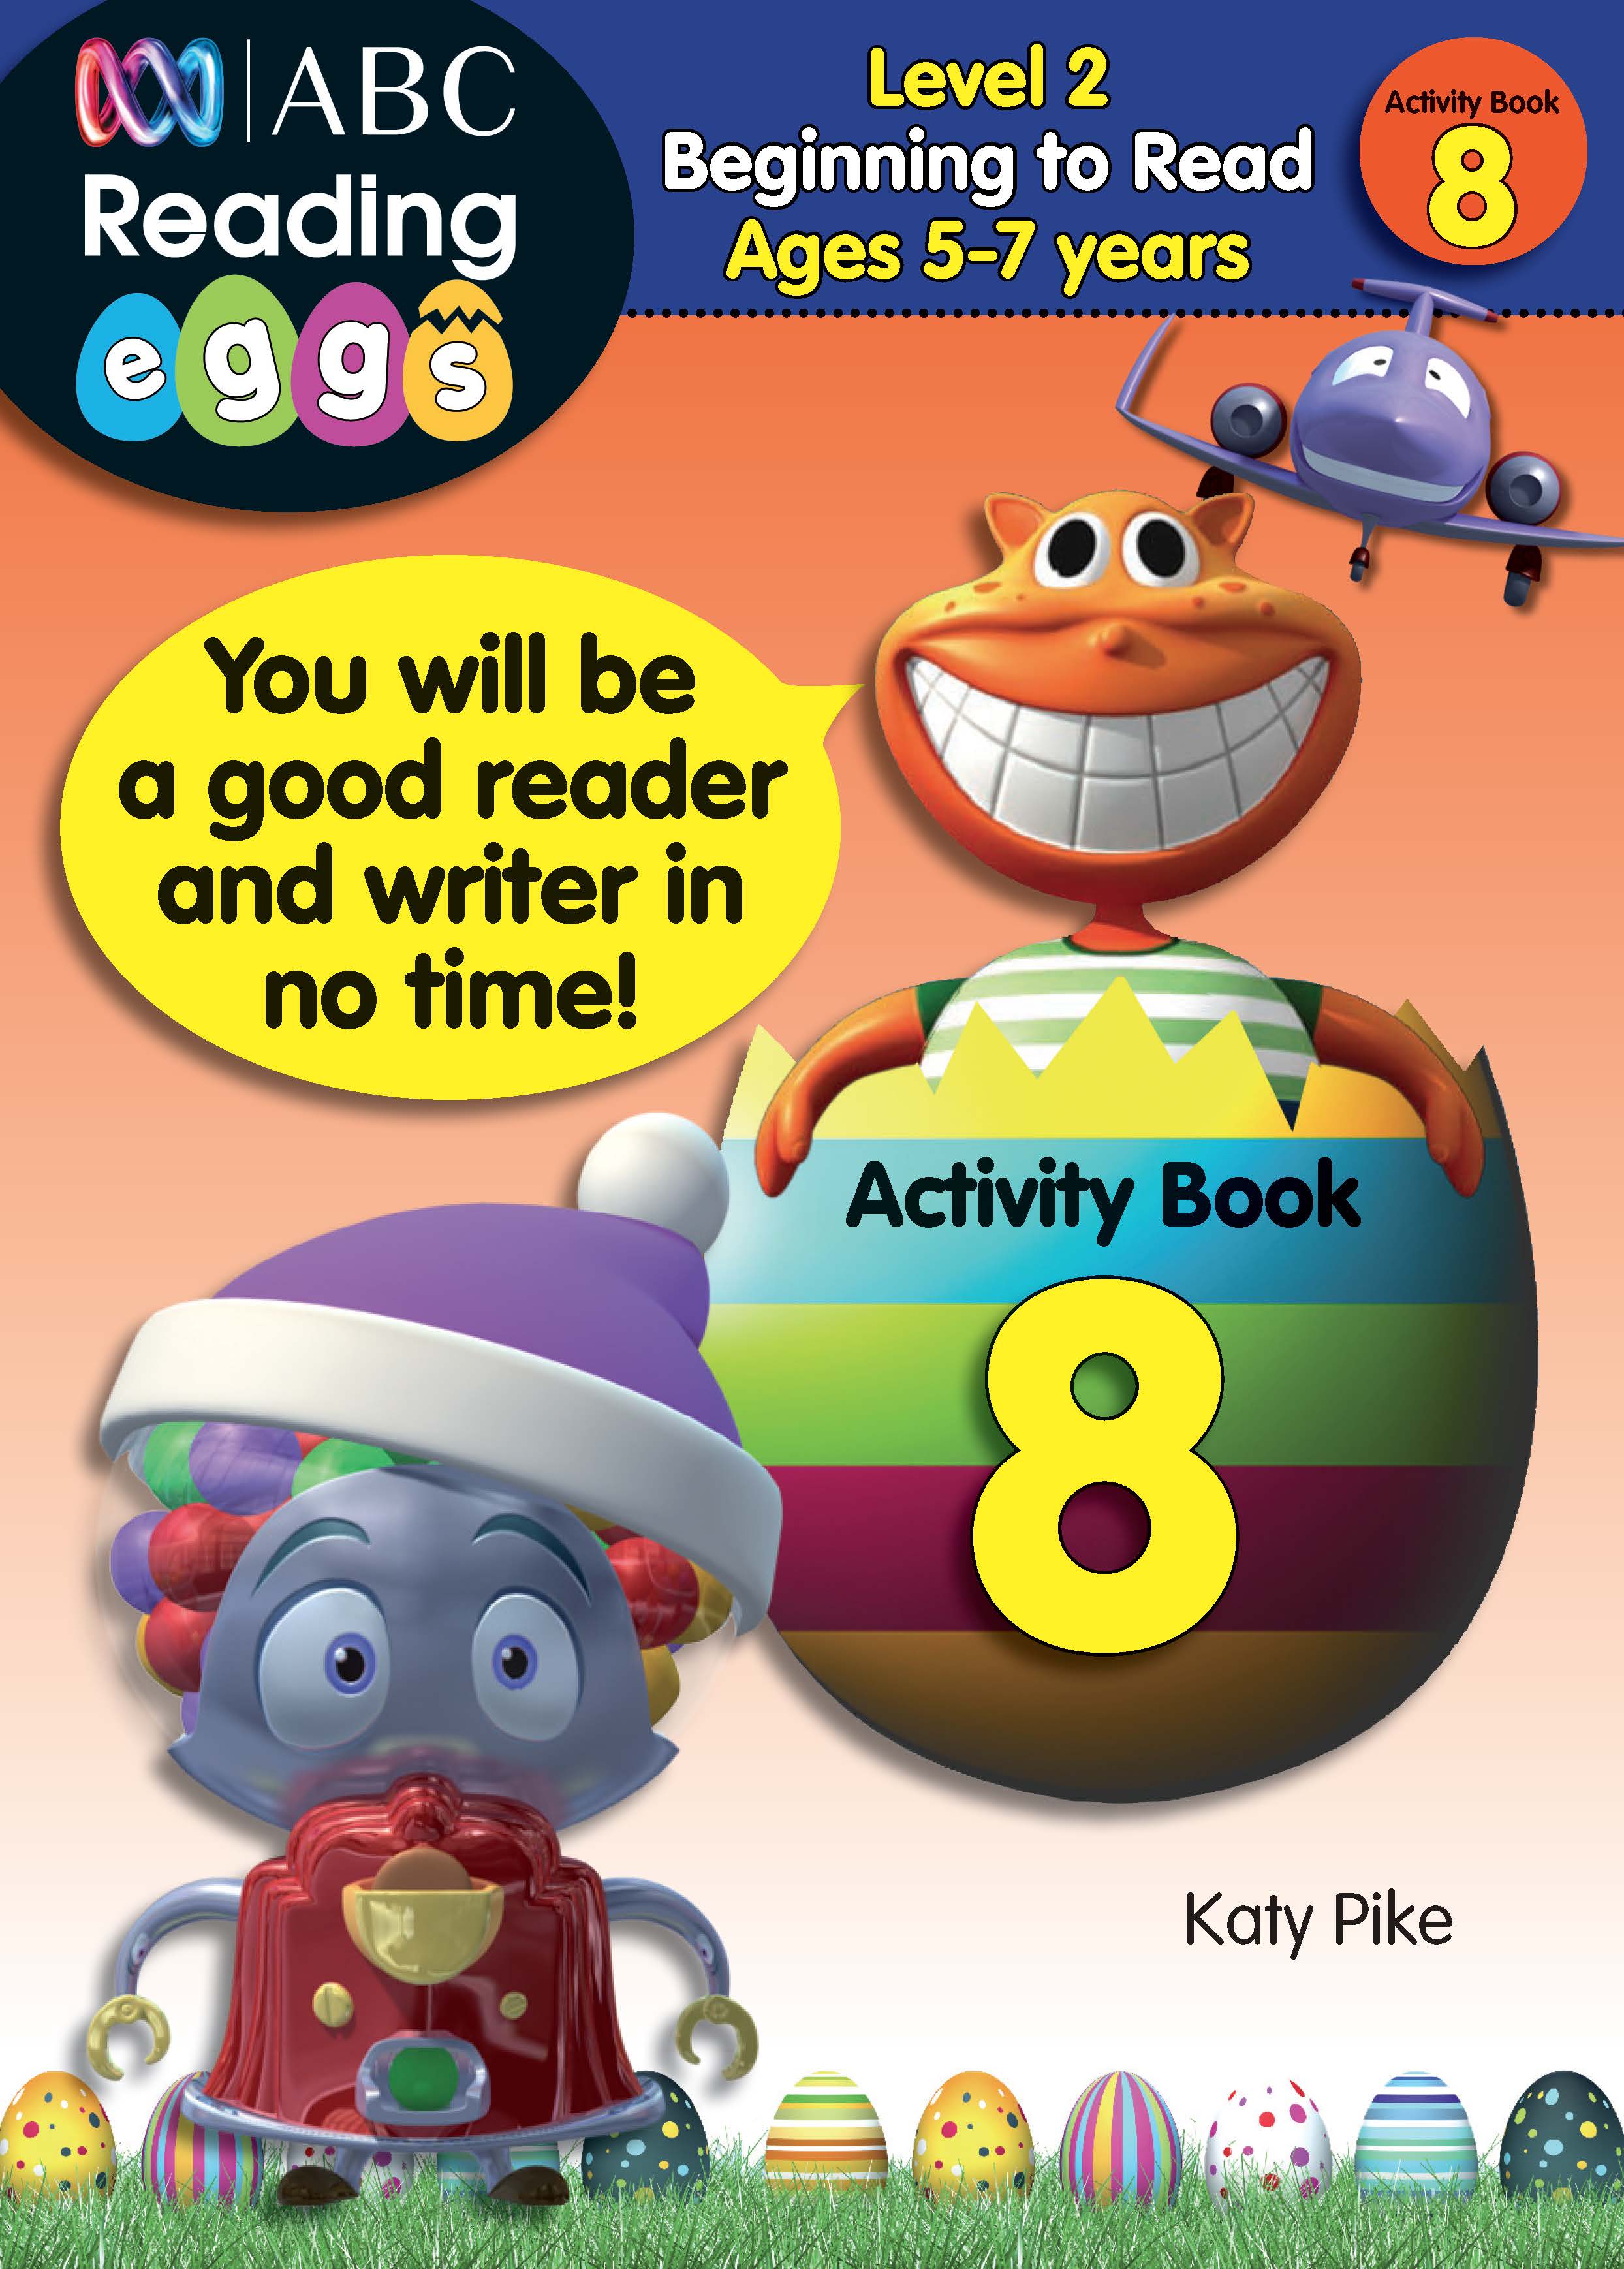 Picture of ABC Reading Eggs Level 2 Beginning to Read Activity Book 8 Ages 5-7